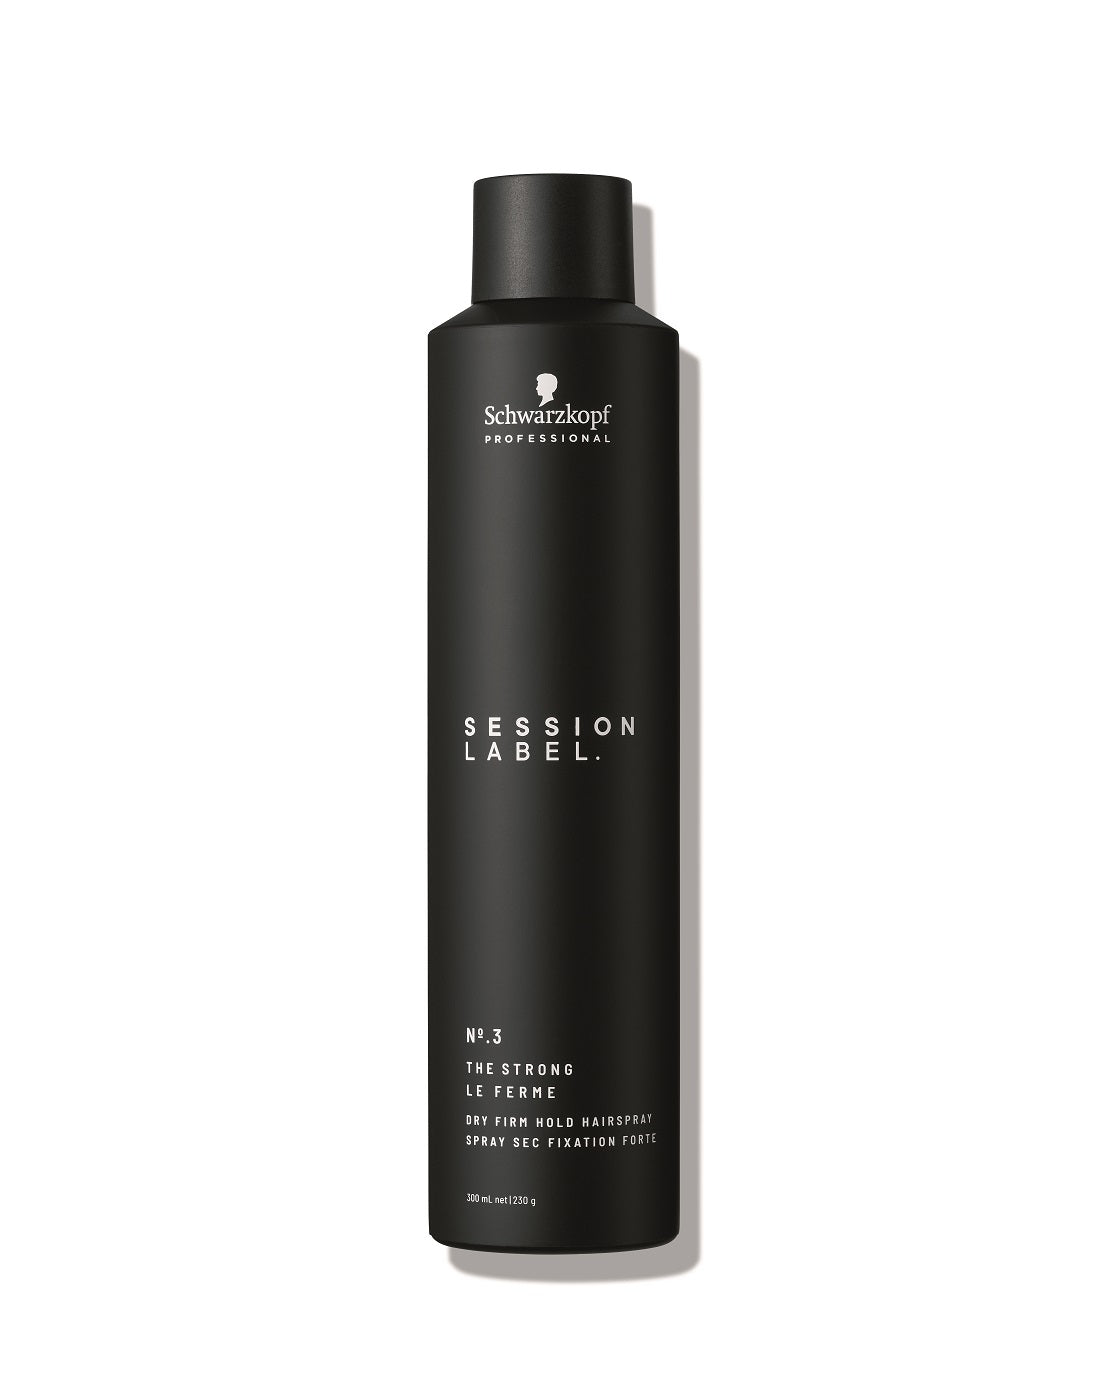 Schwarzkopf Professional - Session Label The Strong - Eds Hair Bramhall